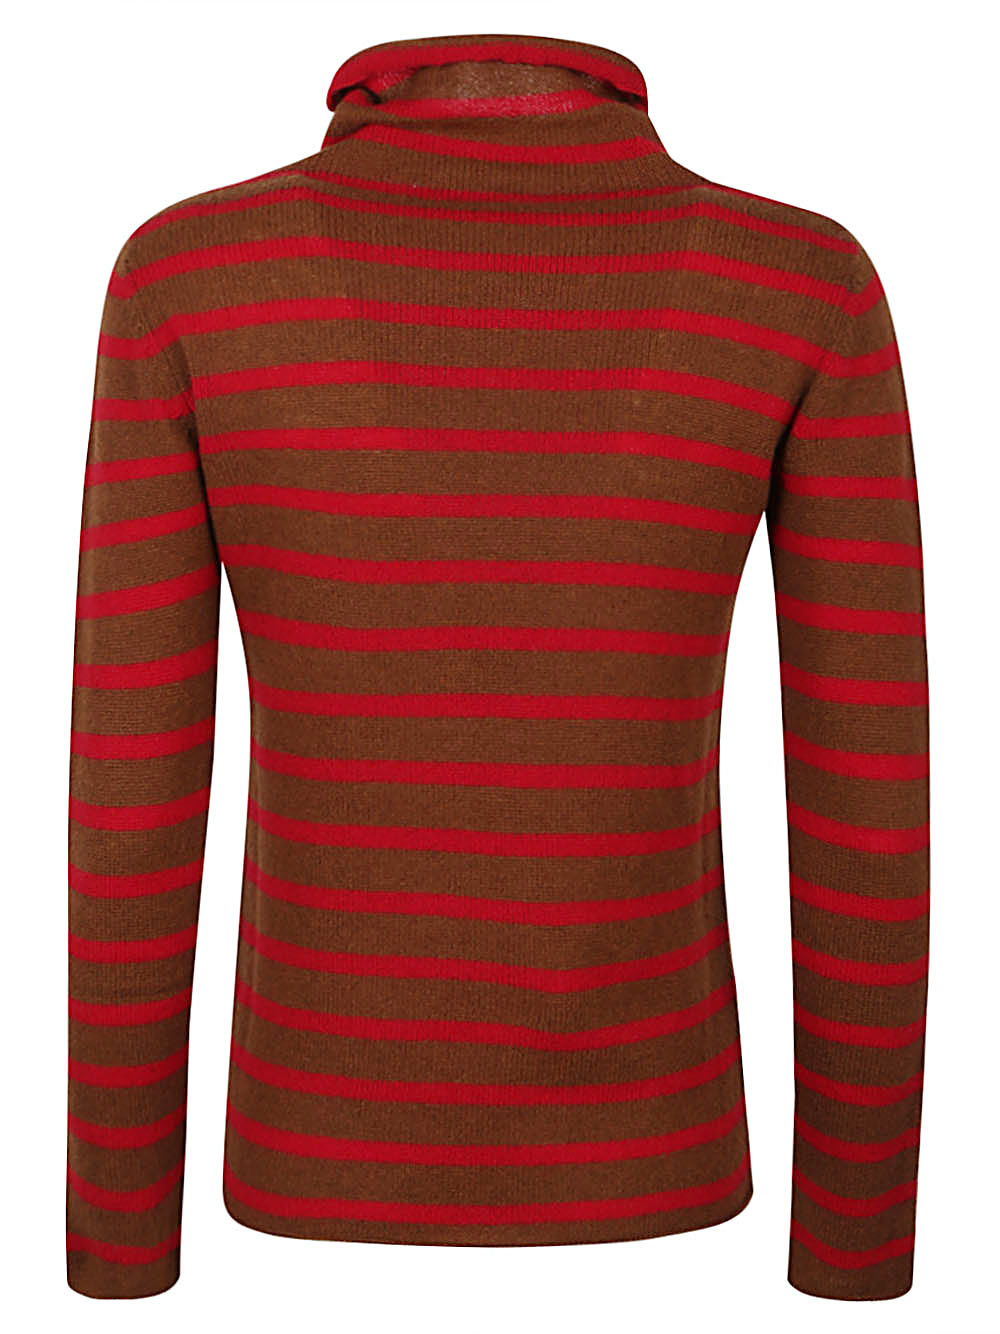 Be You BE YOU- Striped Cashmere Turtleneck Sweater